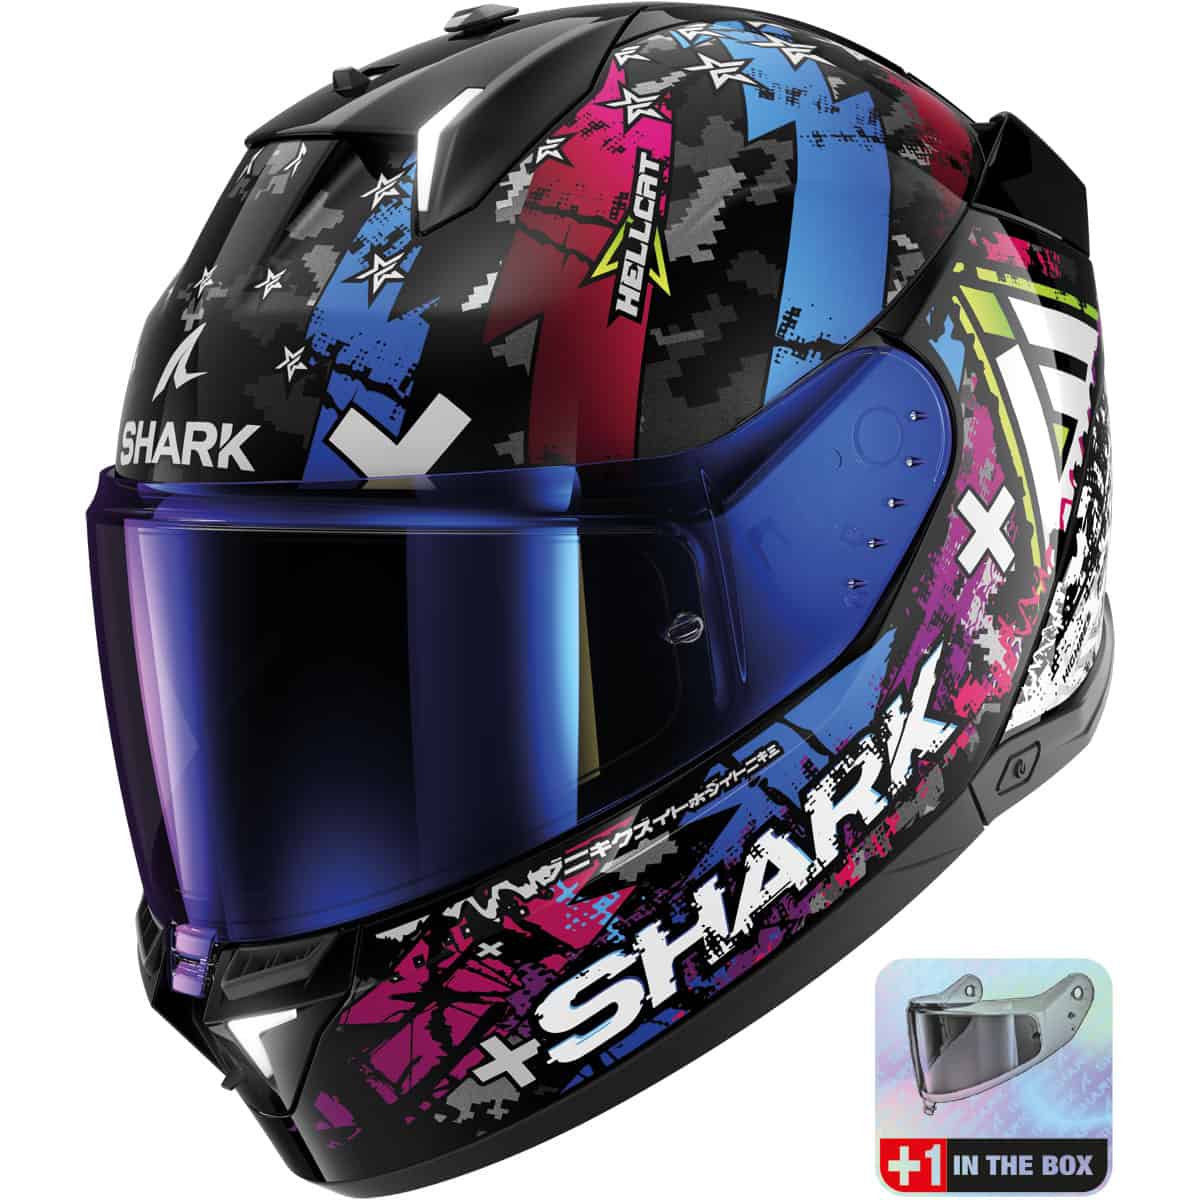 This helmet is delivered with a clear visor and a free dark visor while stocks last. The inclusion of a second visor can change at any moment. If there is a coloured visor in the image and only a clear visor in the box, then the visor pictured is for display purposes only. Different coloured visors are available to purchase separately.